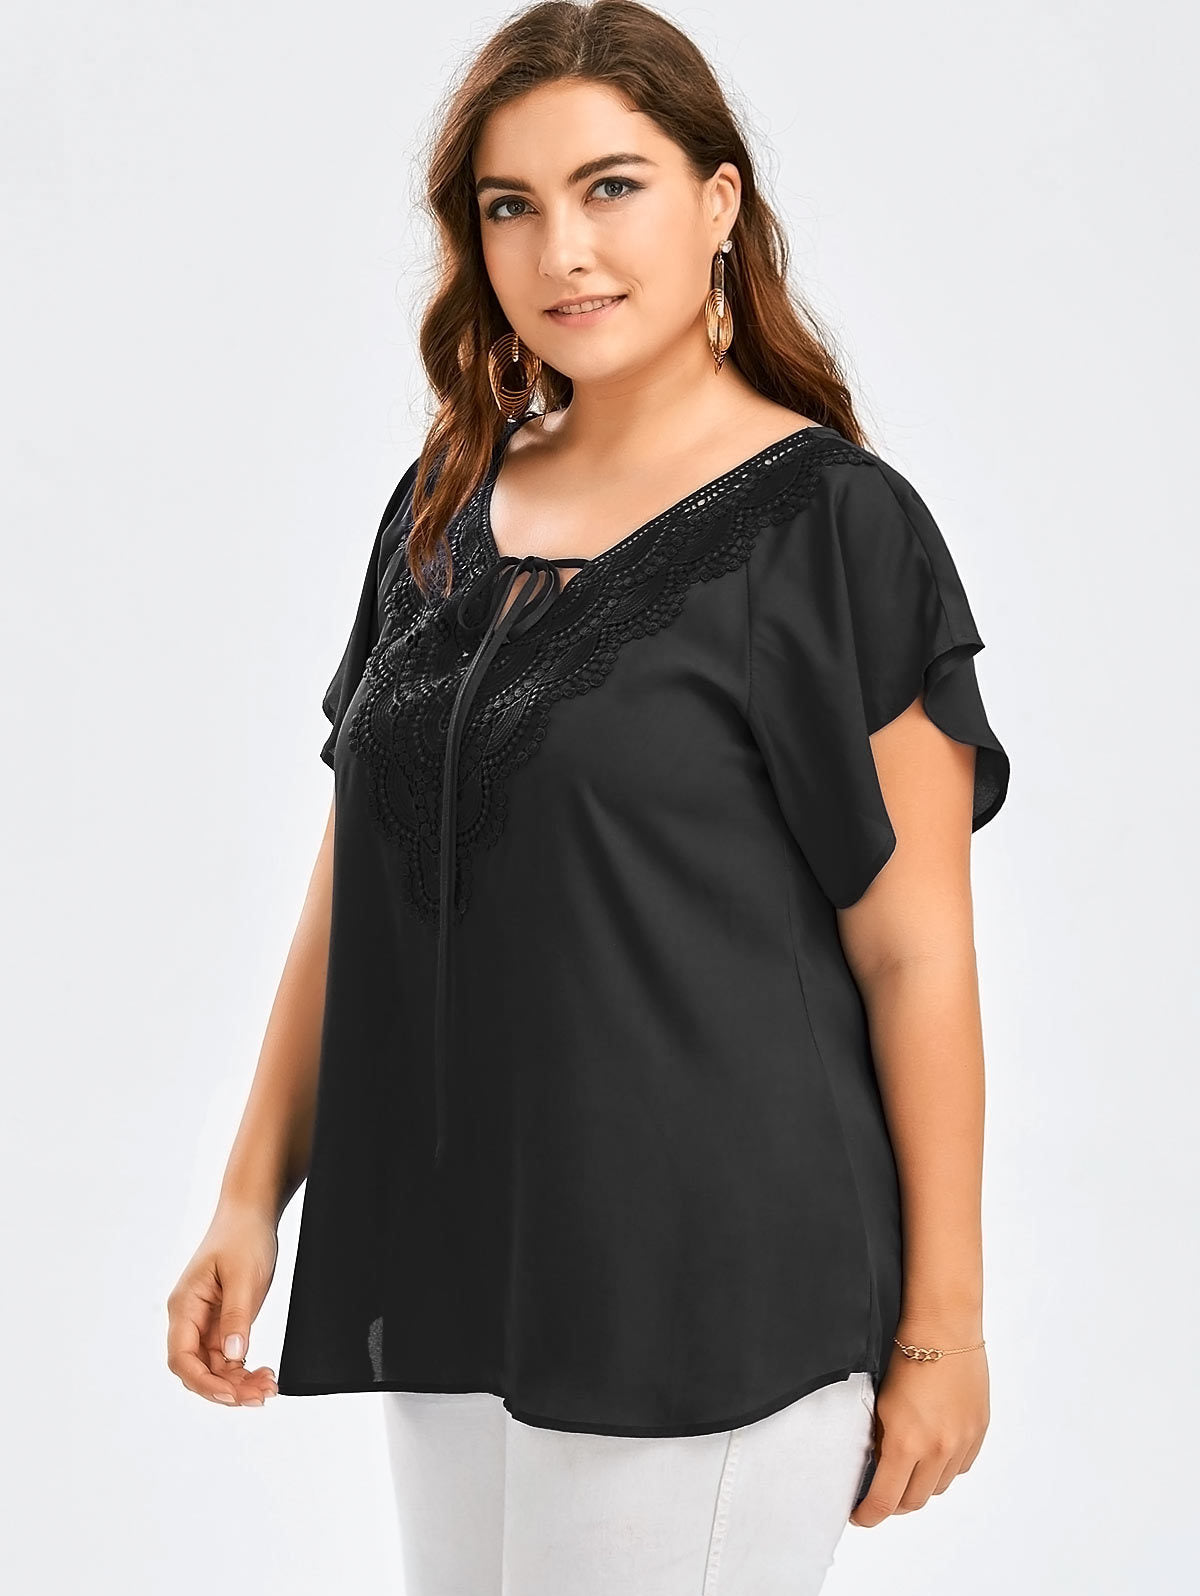 Short-Sleeved T-shirt Lace Stitching Top